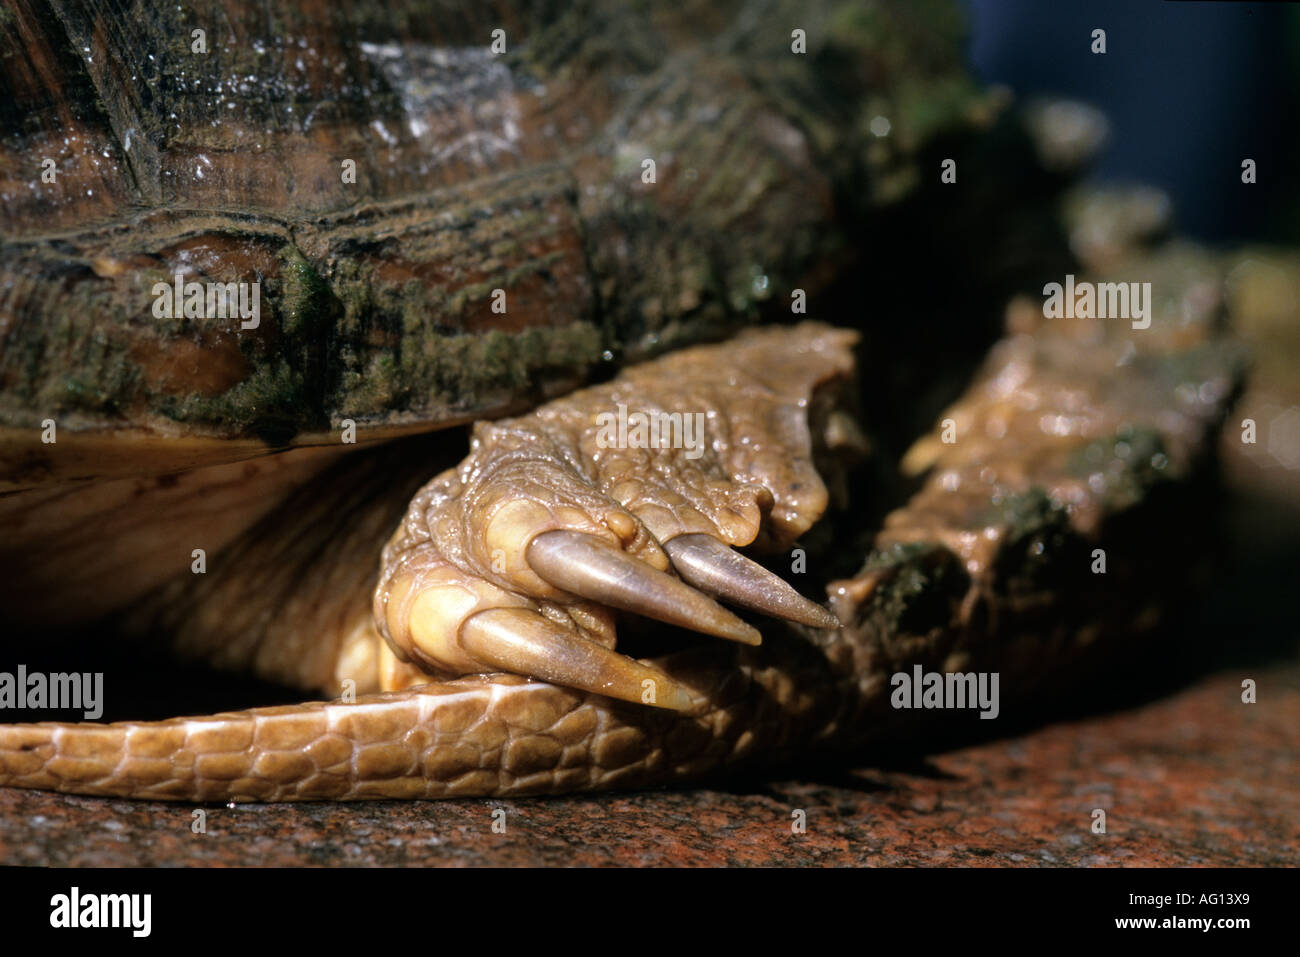 Hind leg and claws of snapping turtle Stock Photo